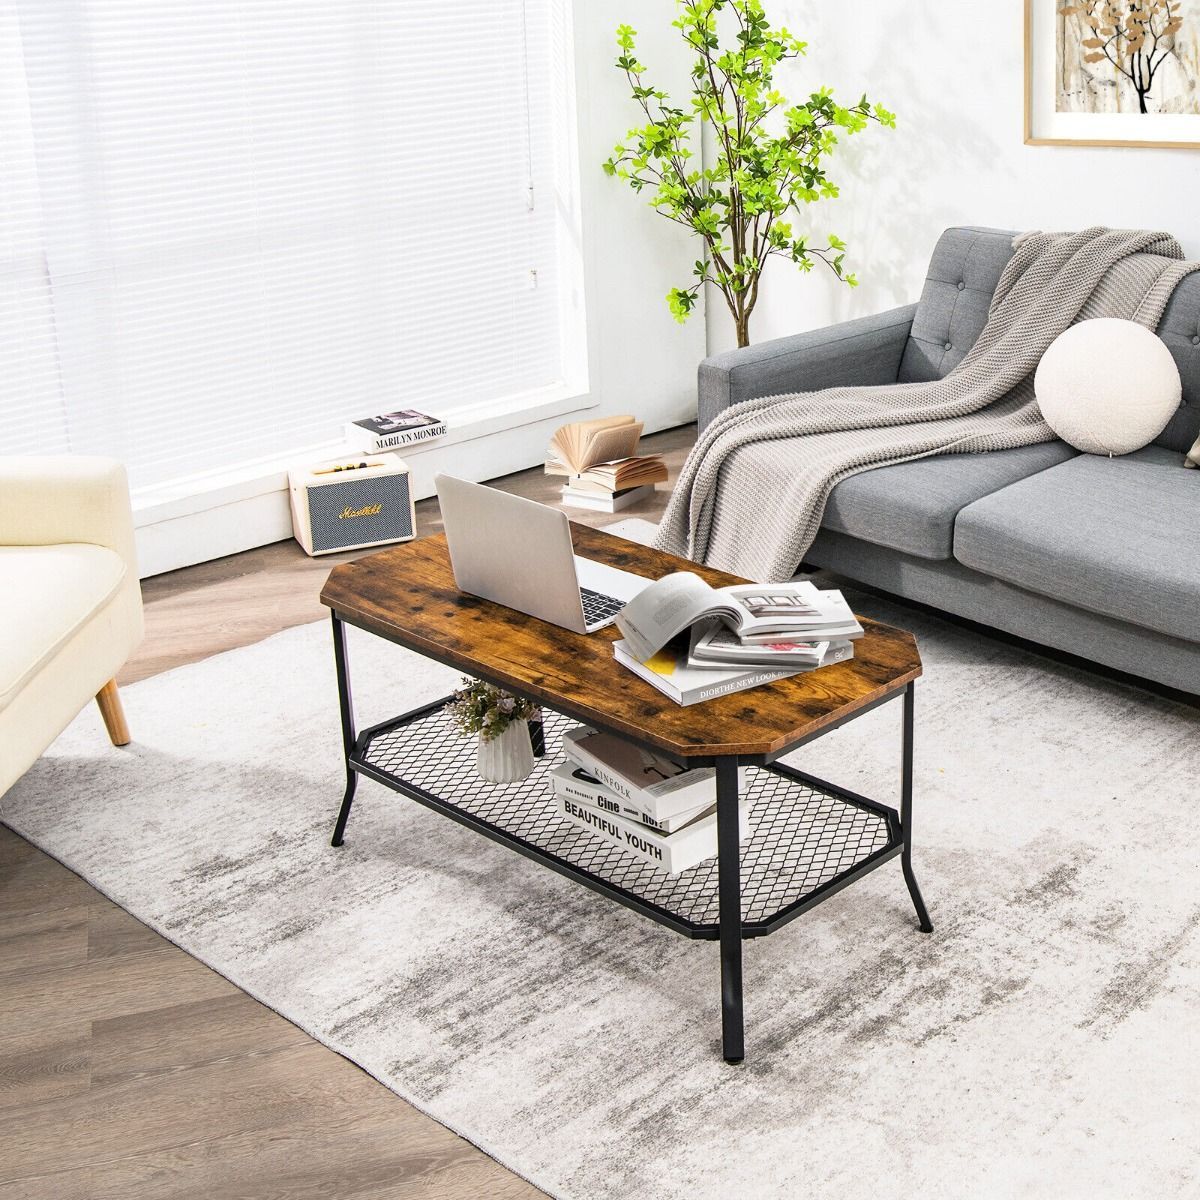 2 Tier Industrial Coffee Table With Open Metal Mesh Shelf For Sale |  Zevelop Uk Within Metal 1 Shelf Coffee Tables (View 11 of 15)